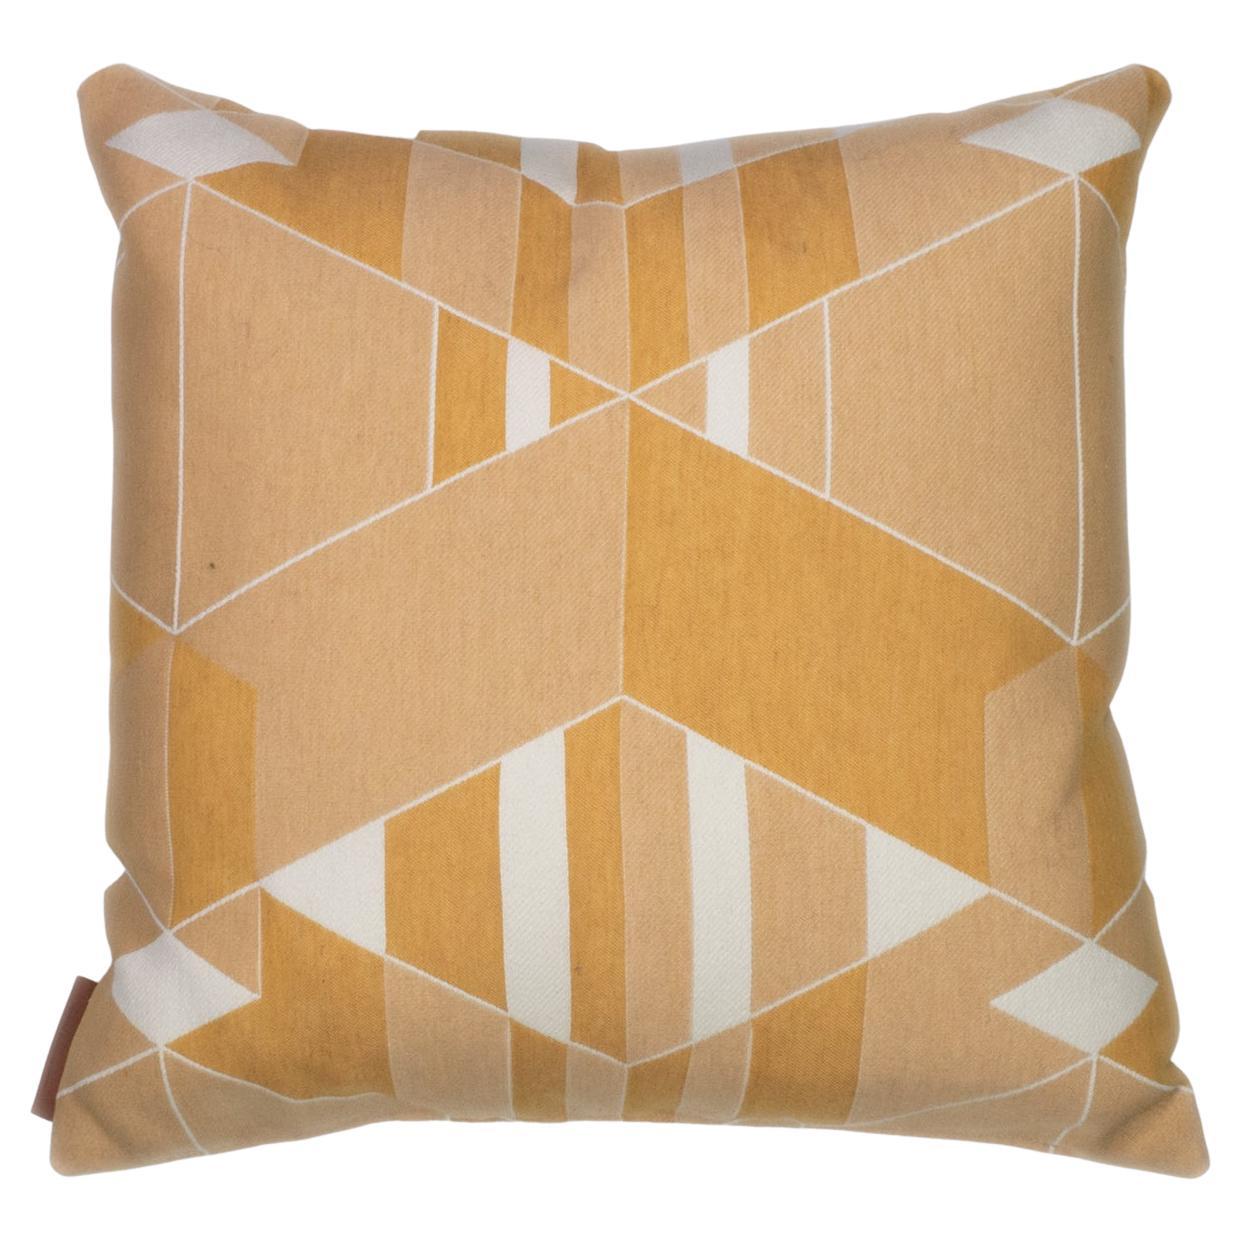 Cushion / Pattern Cushion Absolute Coup De Foudre Gold Reverse by Evolution21 For Sale